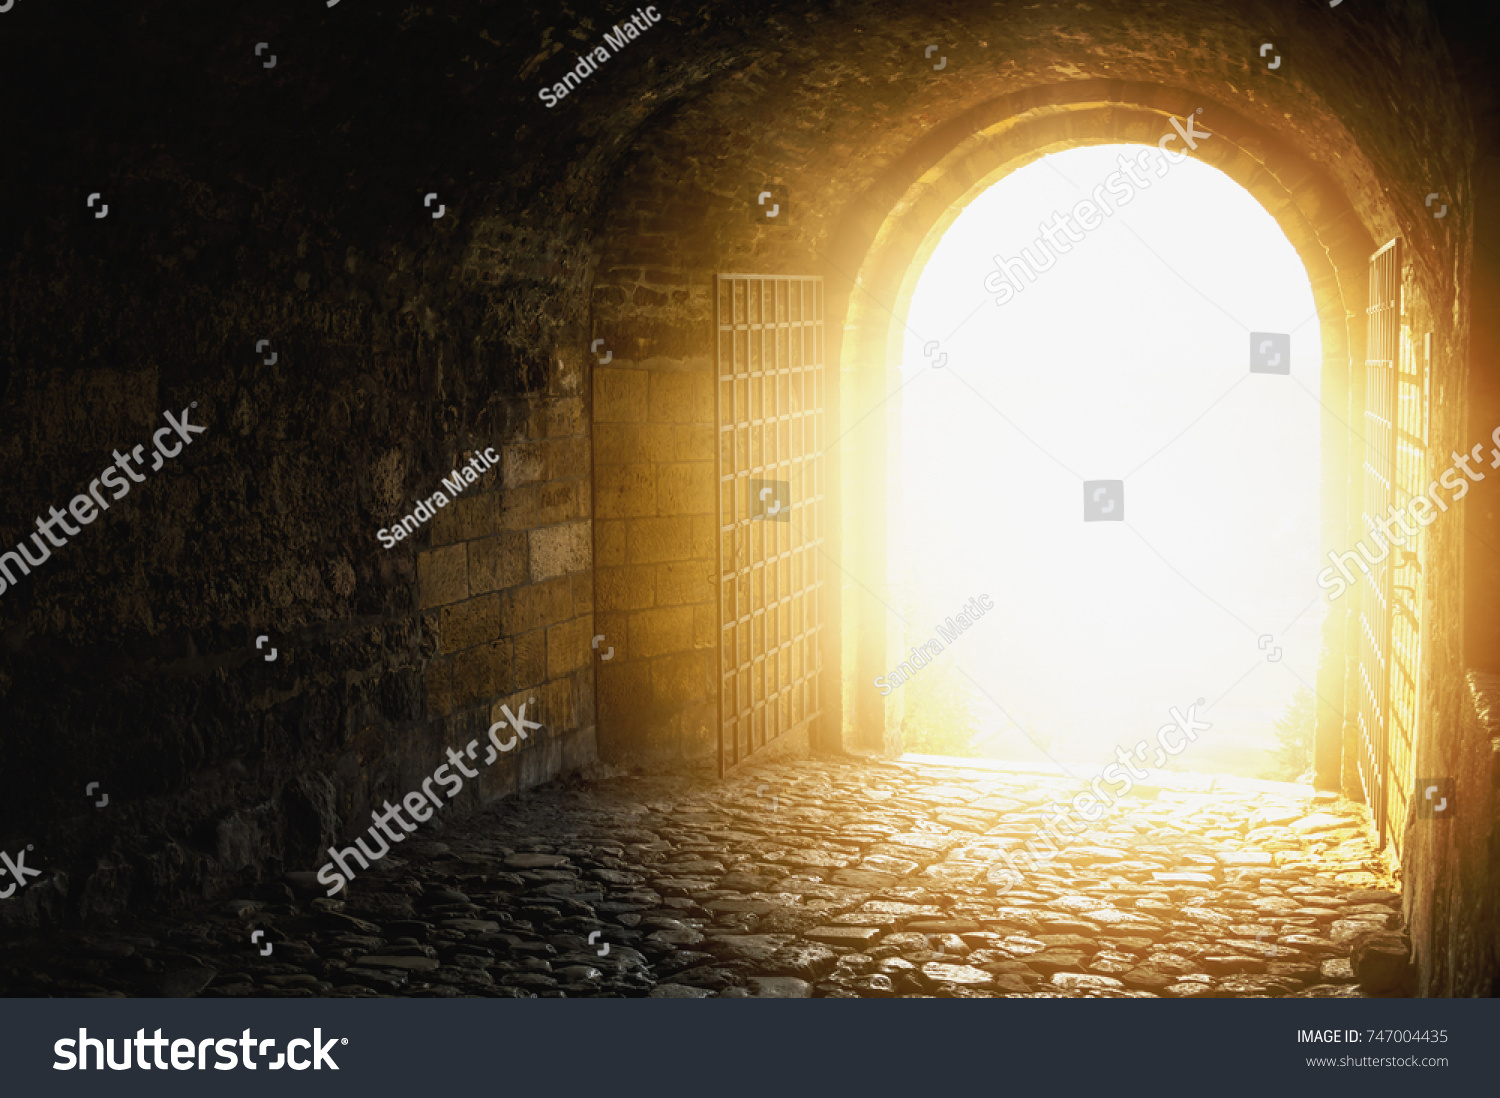 Door to Heaven. Arched passage open to heaven`s sky. Light at end of the tunnel. Hope metaphor. #747004435